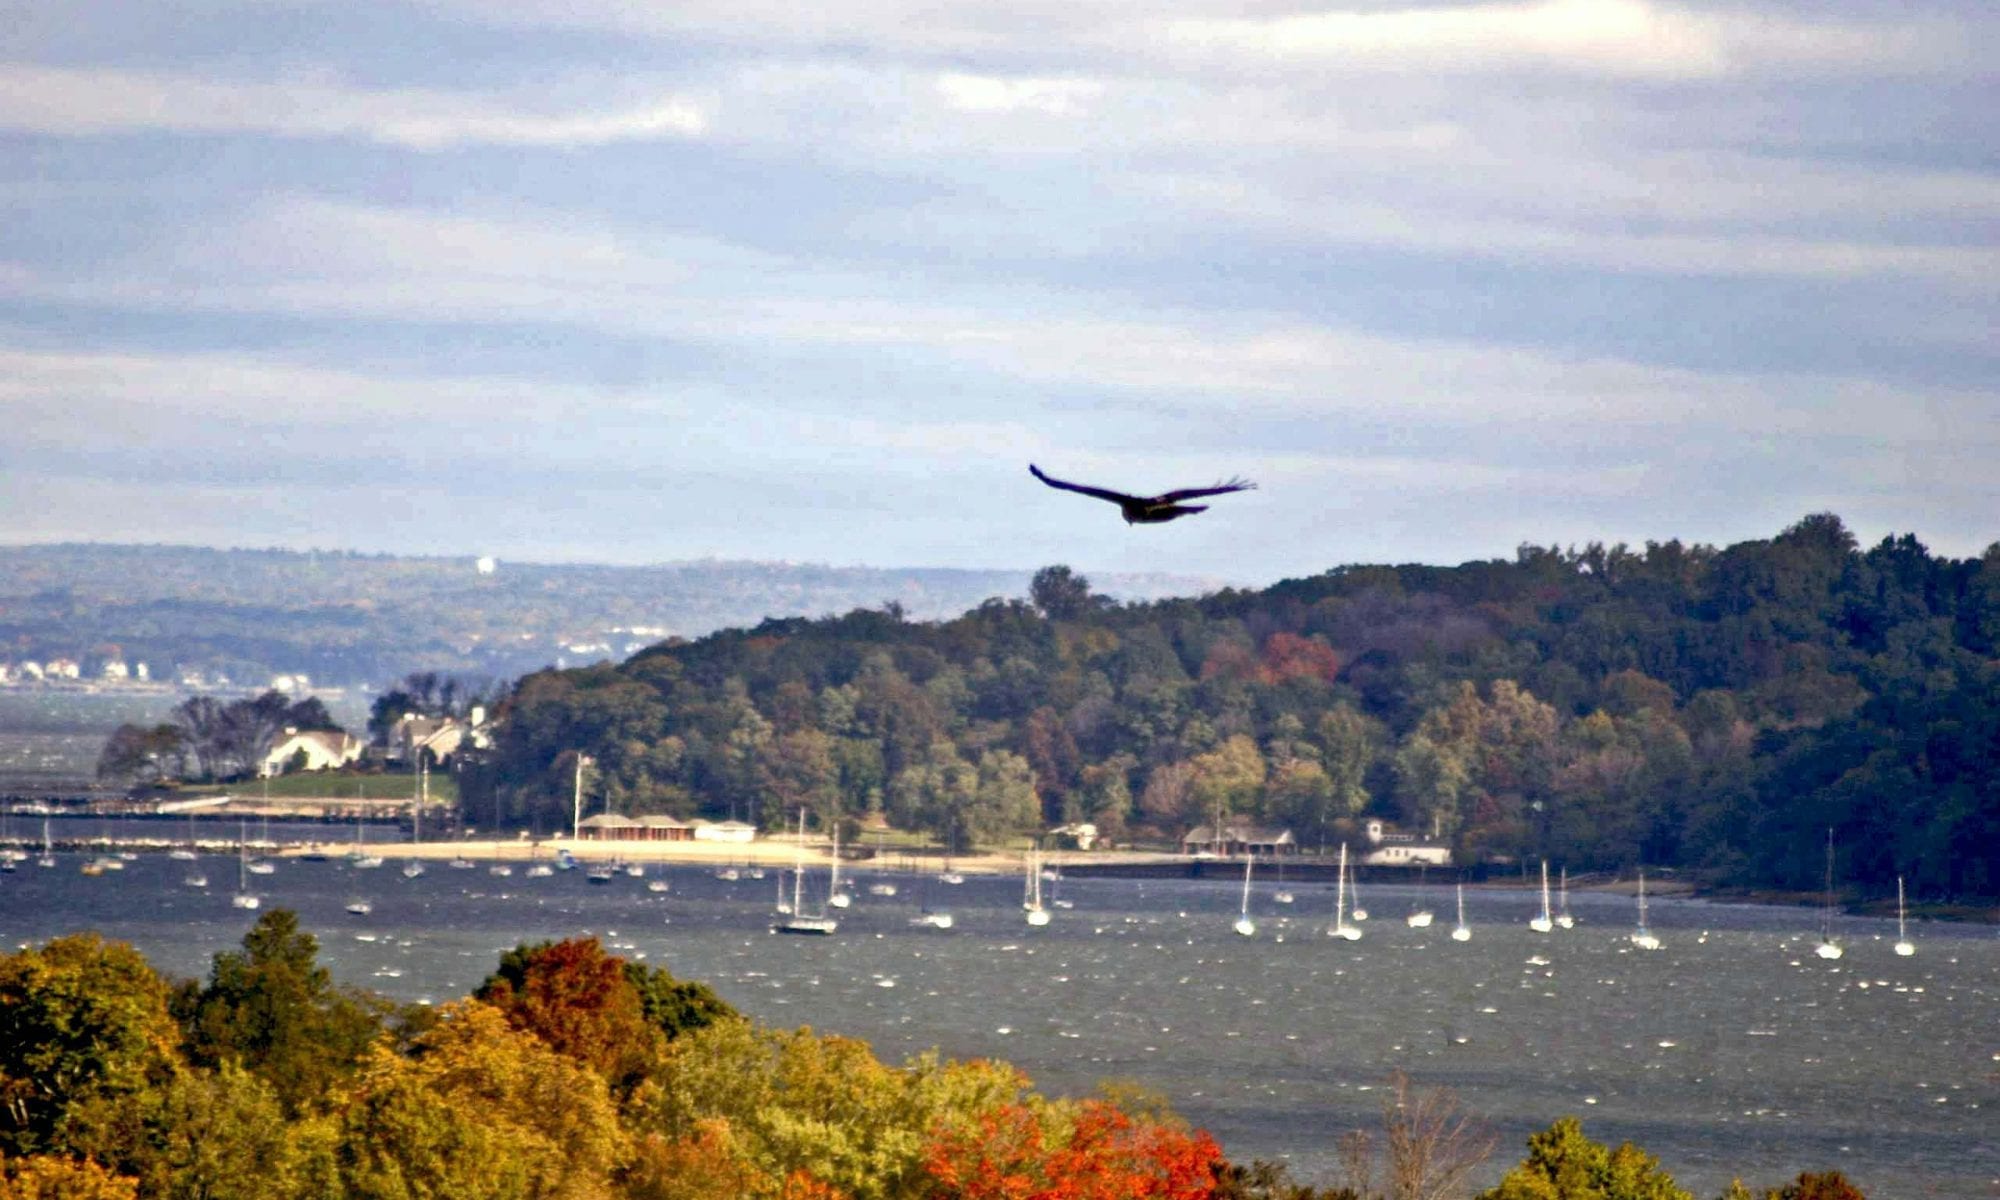 Image of Osprey flying over Fall foliage in the Harbor